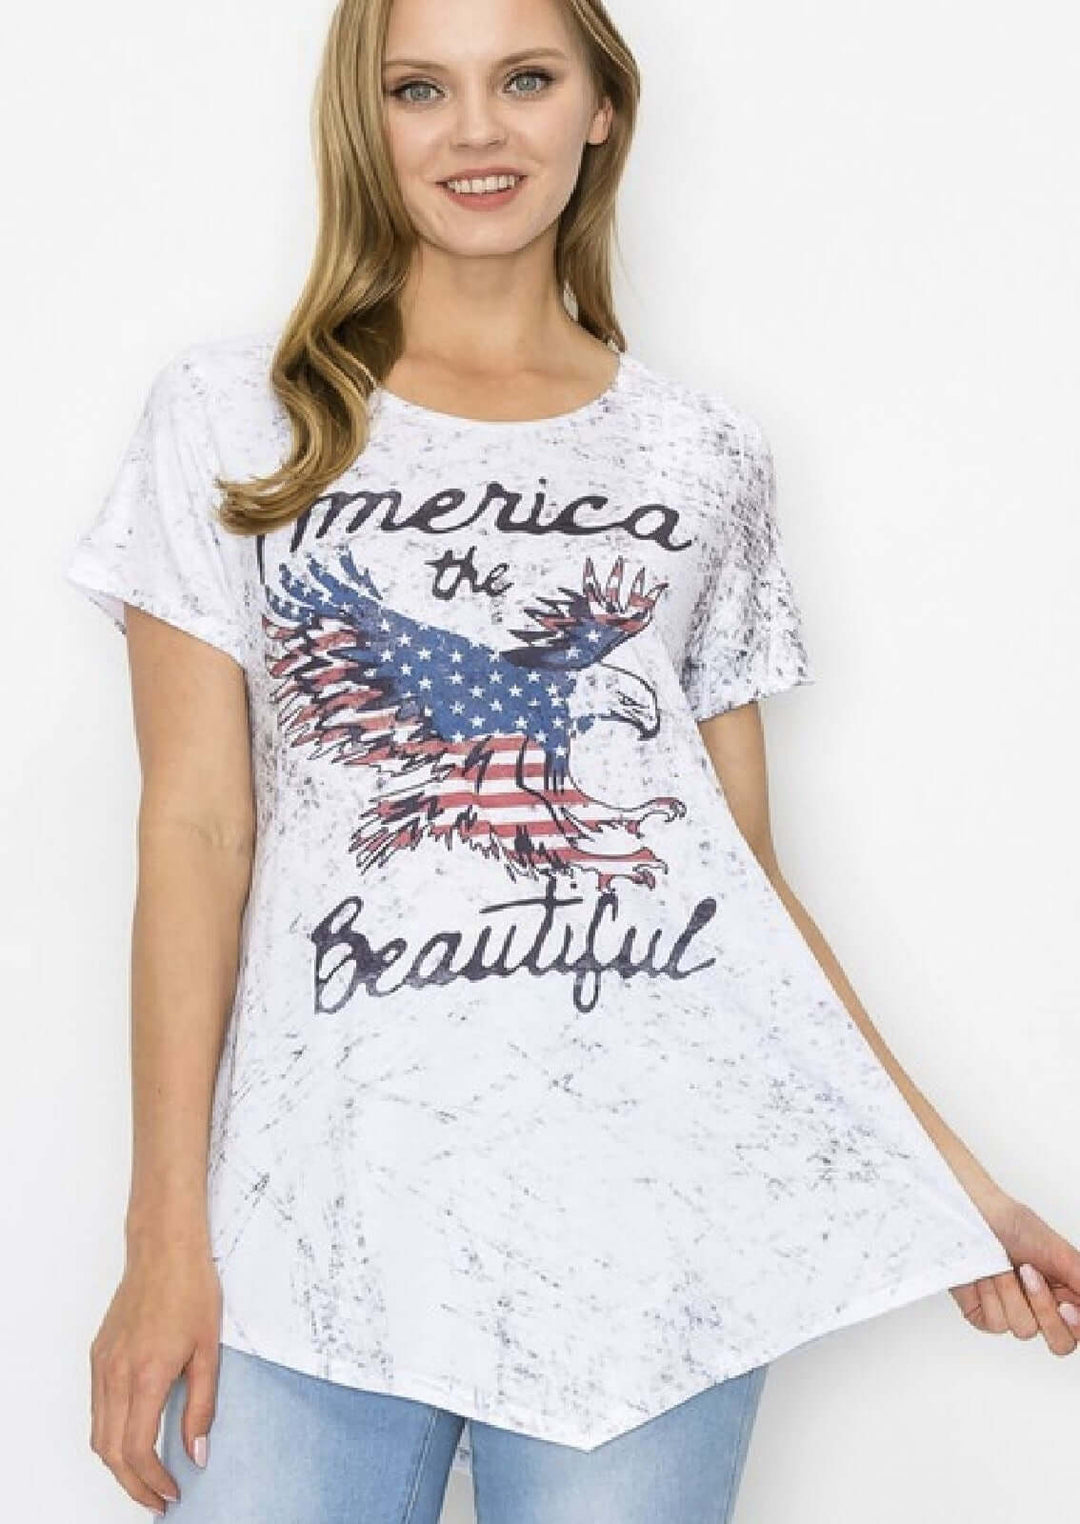 Ladies America The Beautiful Graphic Dye Sublimated Asymmetrical Hem Tee Perfect for 4th of July | Made in USA | Classy Cozy Cool Women's Made in America Boutique